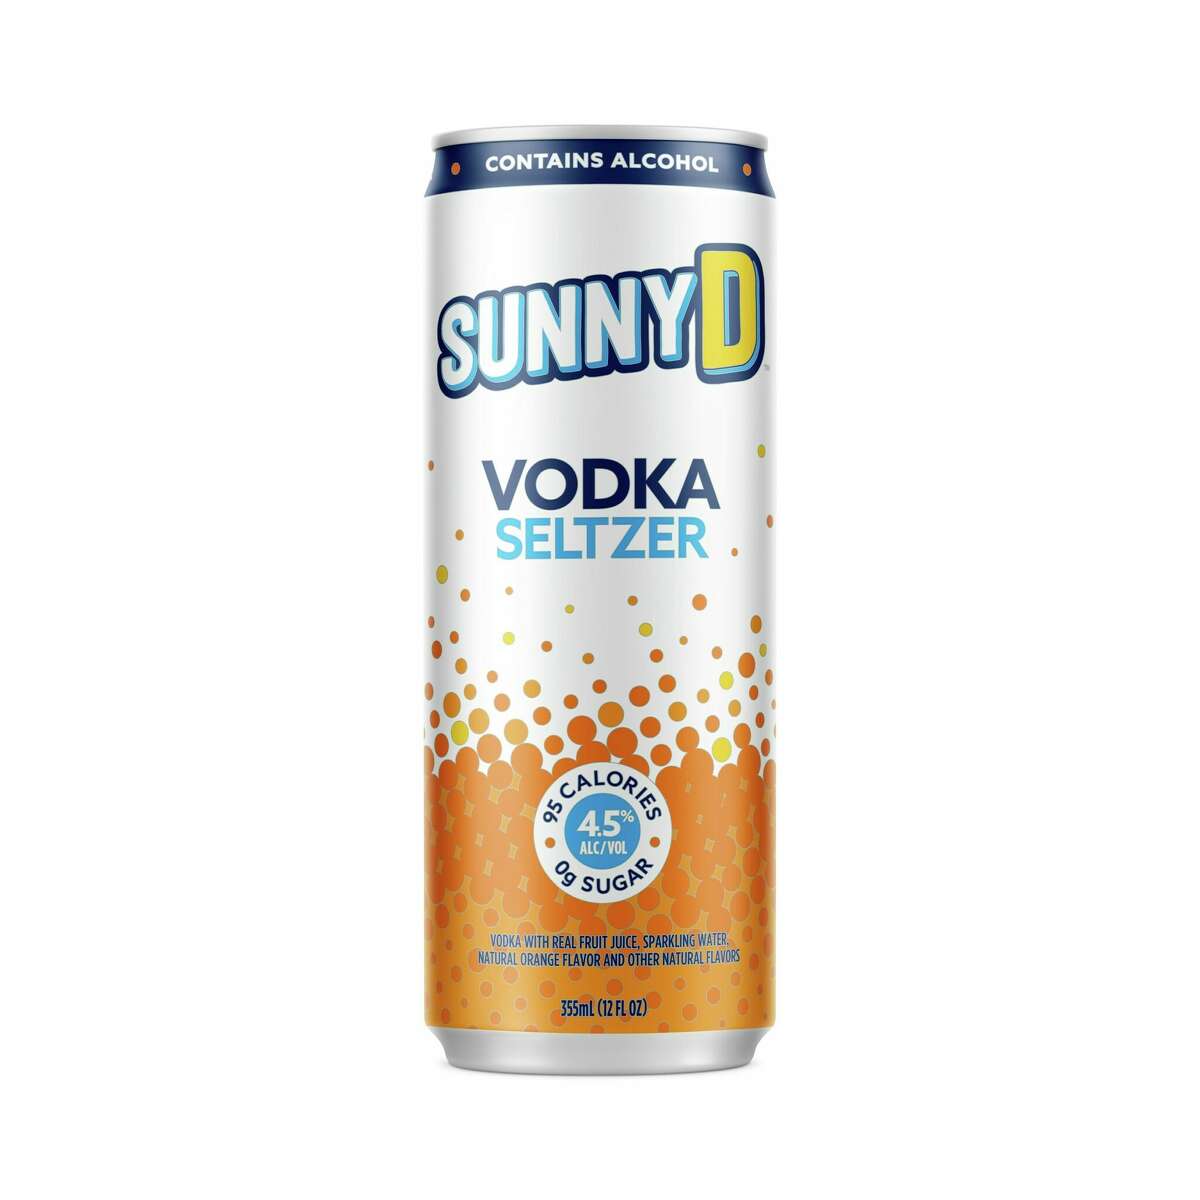 SunnyD Vodka Seltzer will be available at select Walmart stores beginning Saturday. 